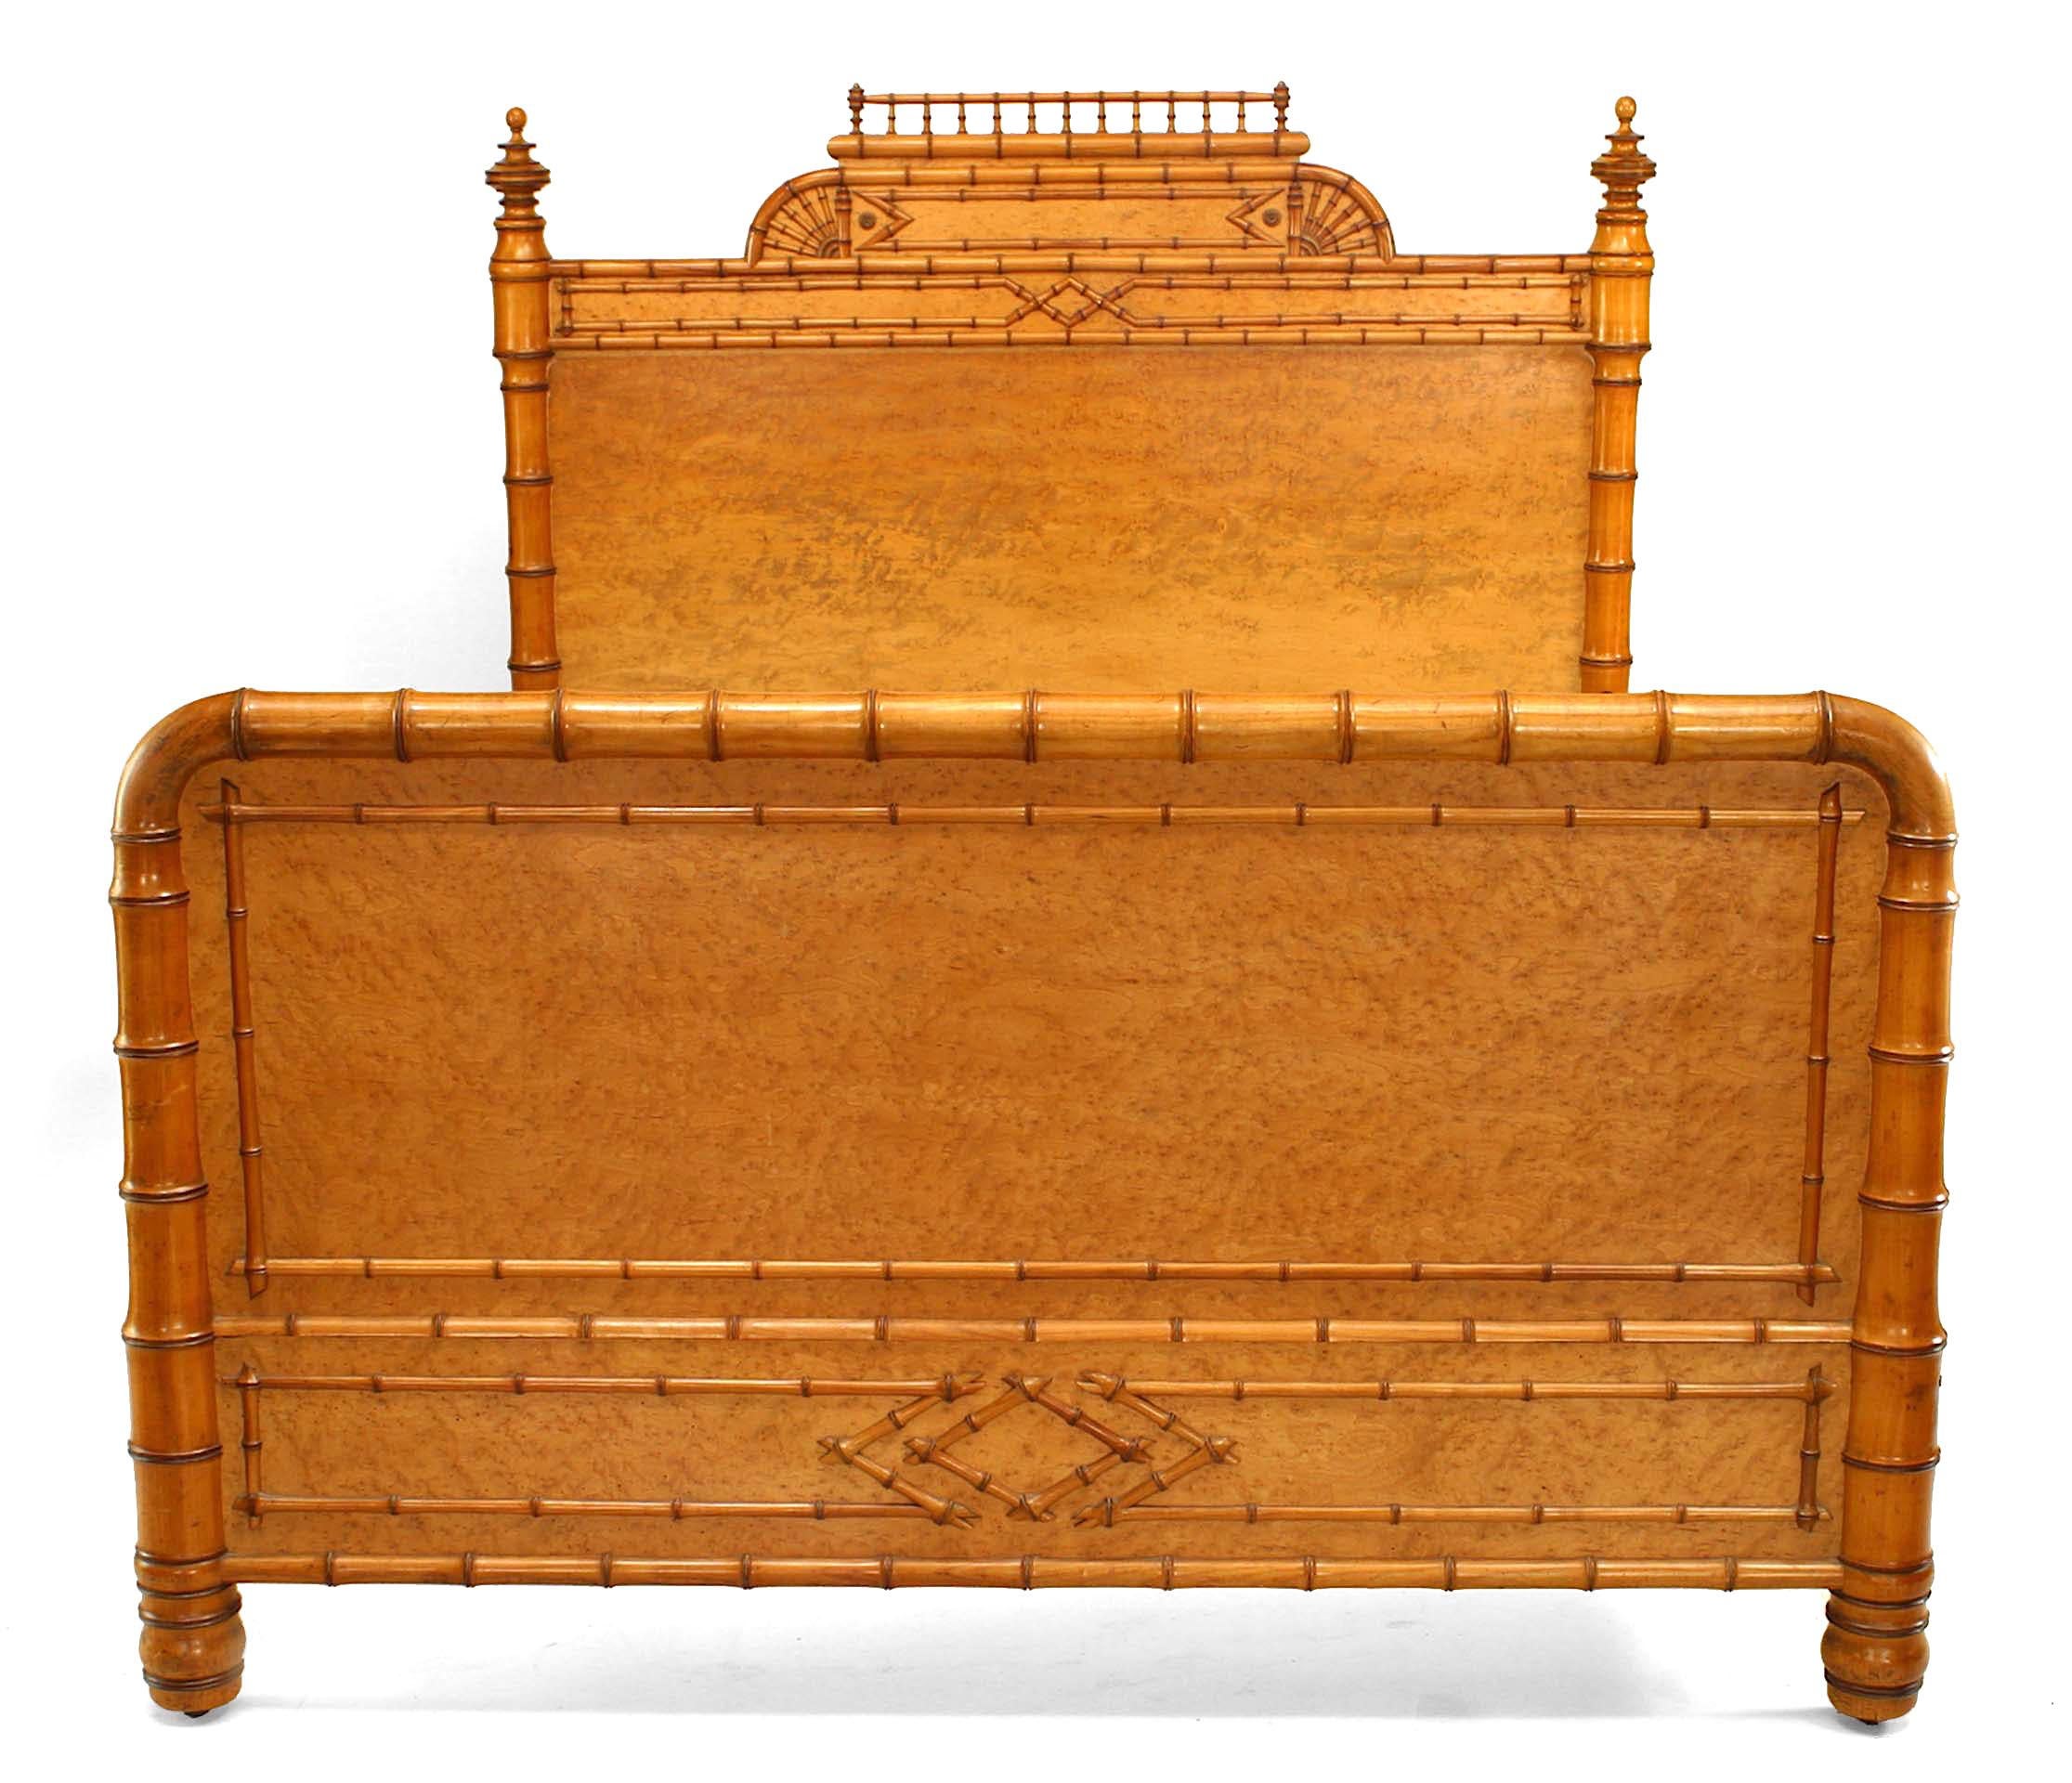 American Victorian faux bamboo full size birds eye maple bed with side finials and filigree pediment top on headboard (includes: headboard footboard and rails)
